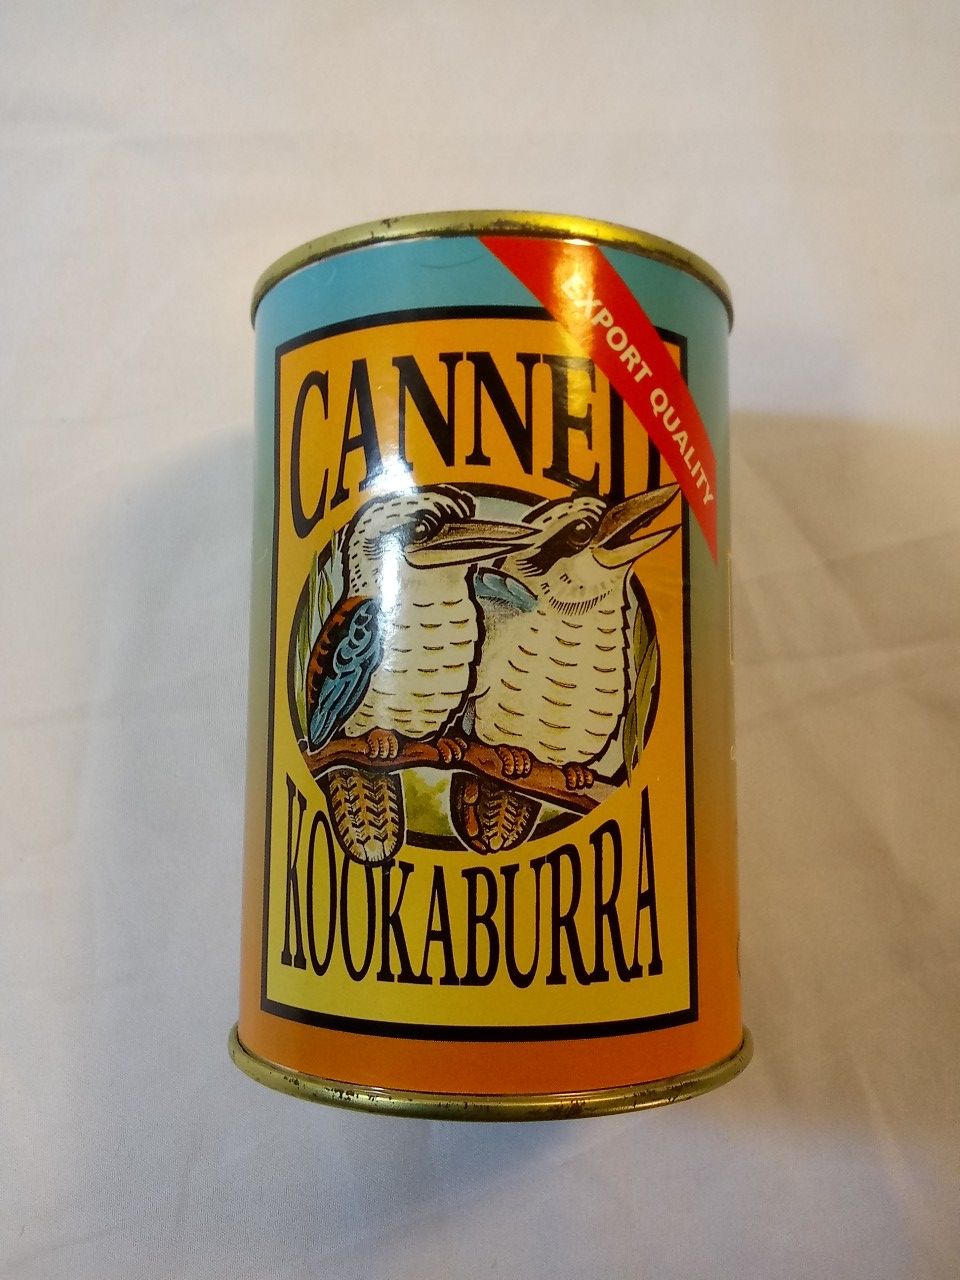 Canned Kookaburra, Aussie Cans, Cute Gift, Stuffed Animal, Collectible, Toy, Sealed, New